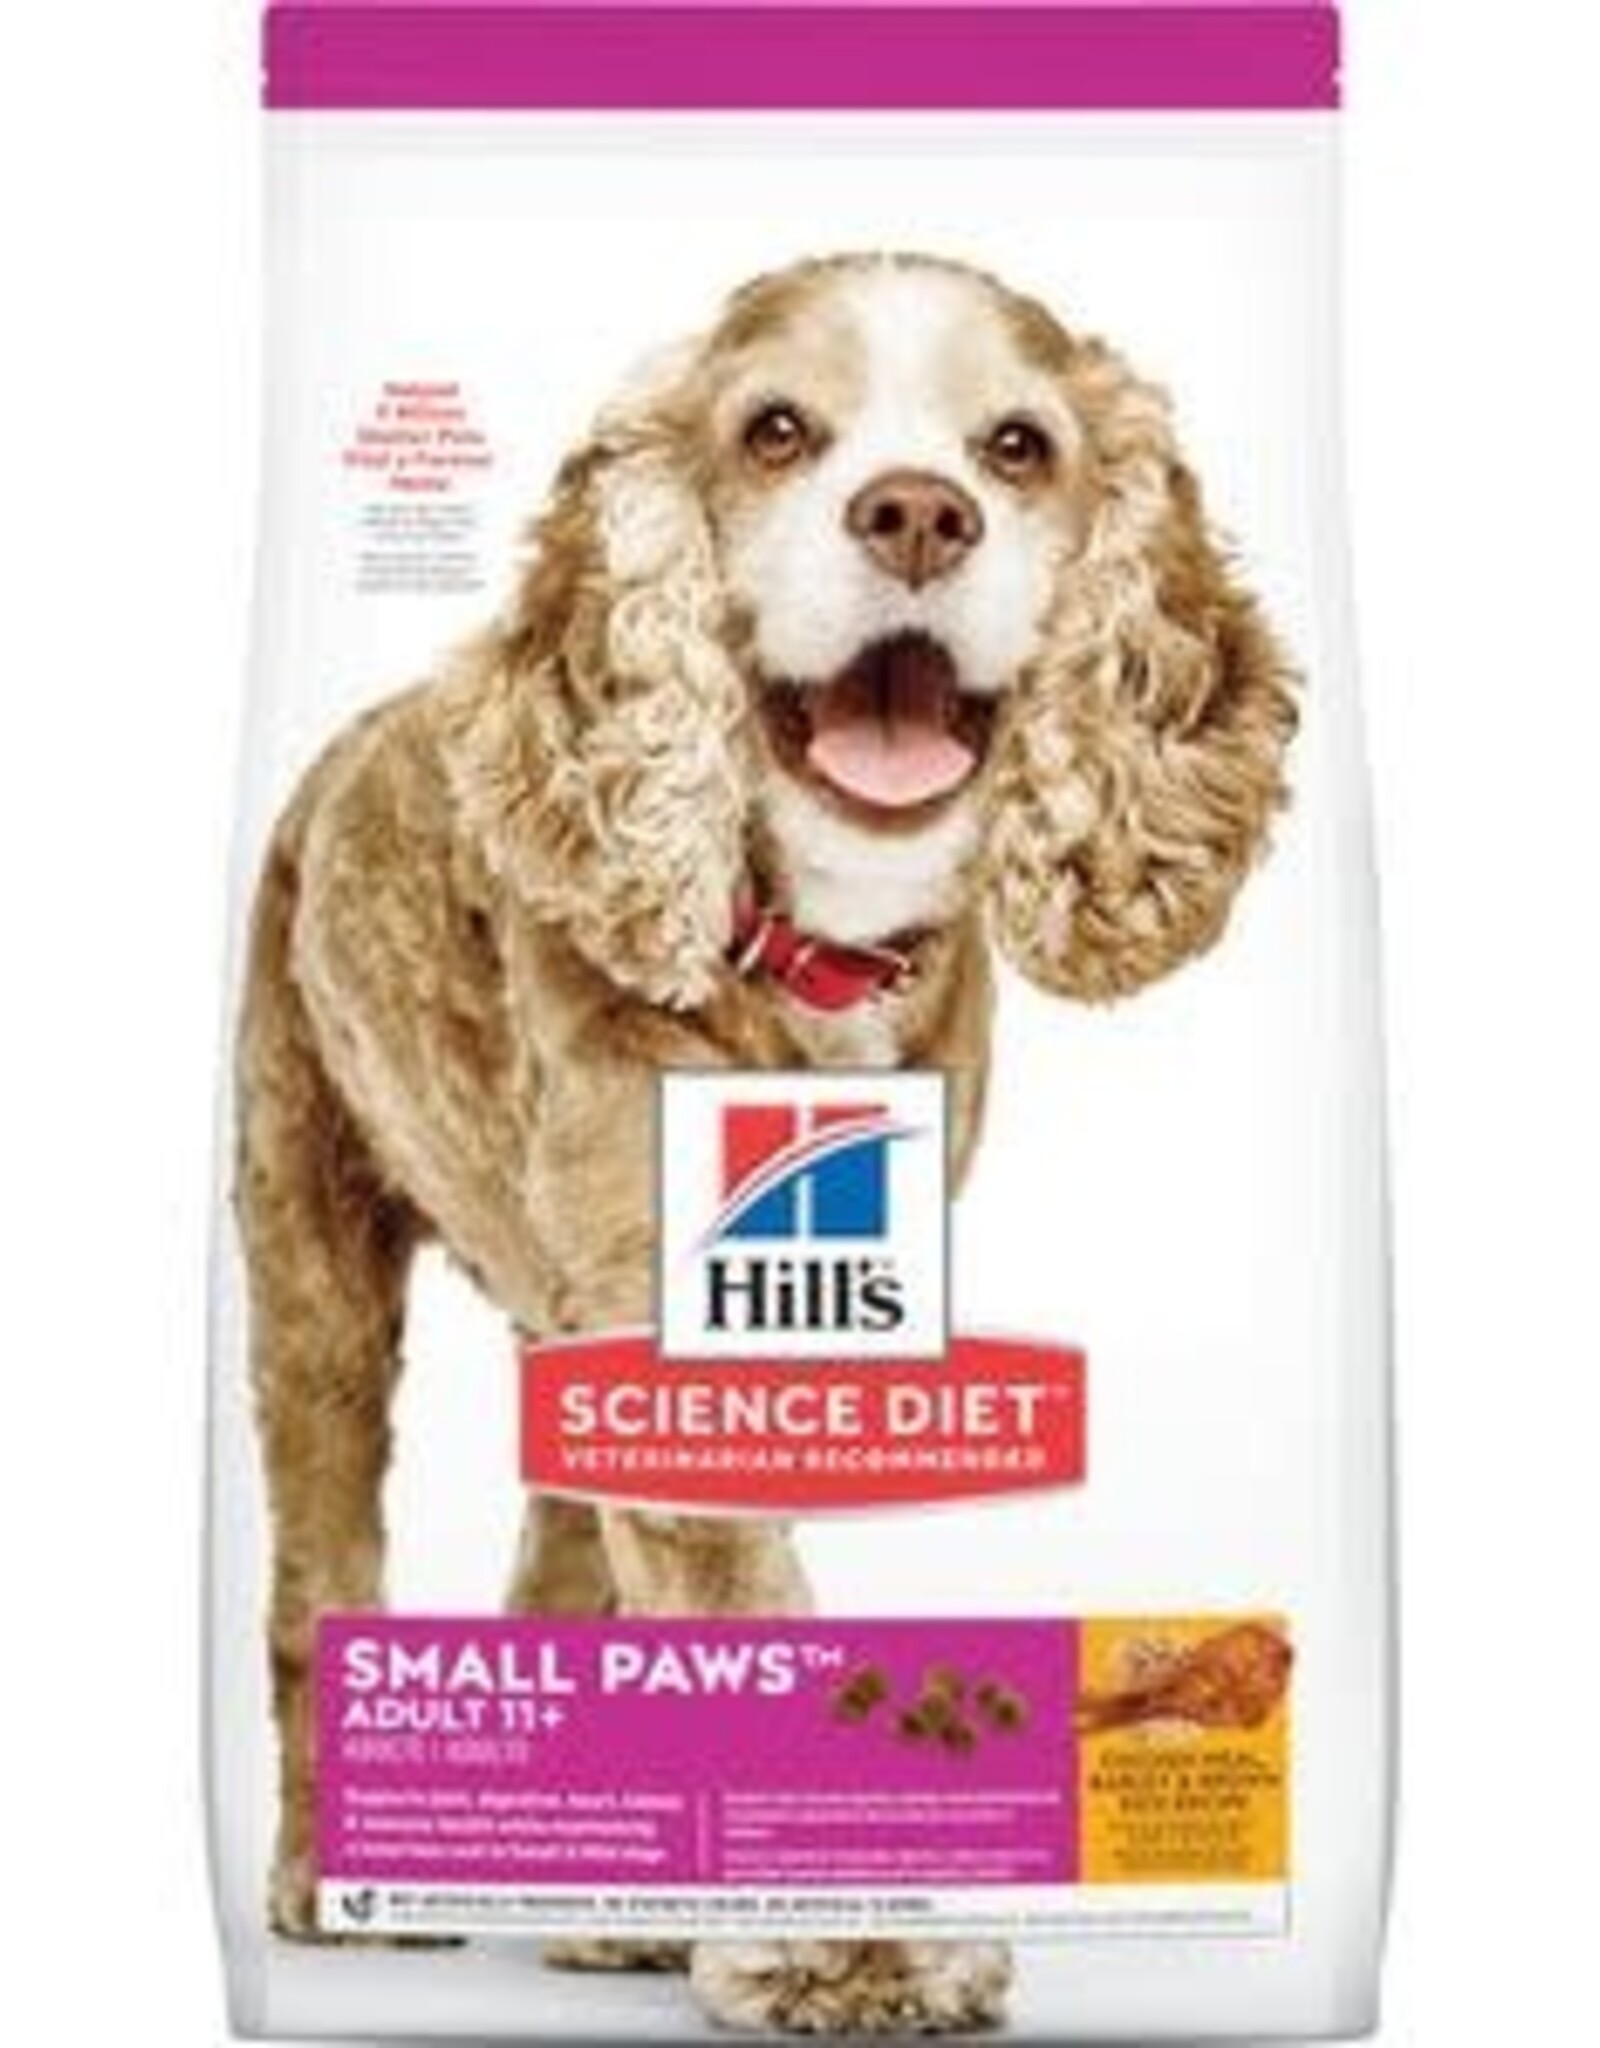 Hill's Science Diet Senior 11+ Small Paws  Chicken Meal, Barley & Brown Rice Recipe, 15.5 lb